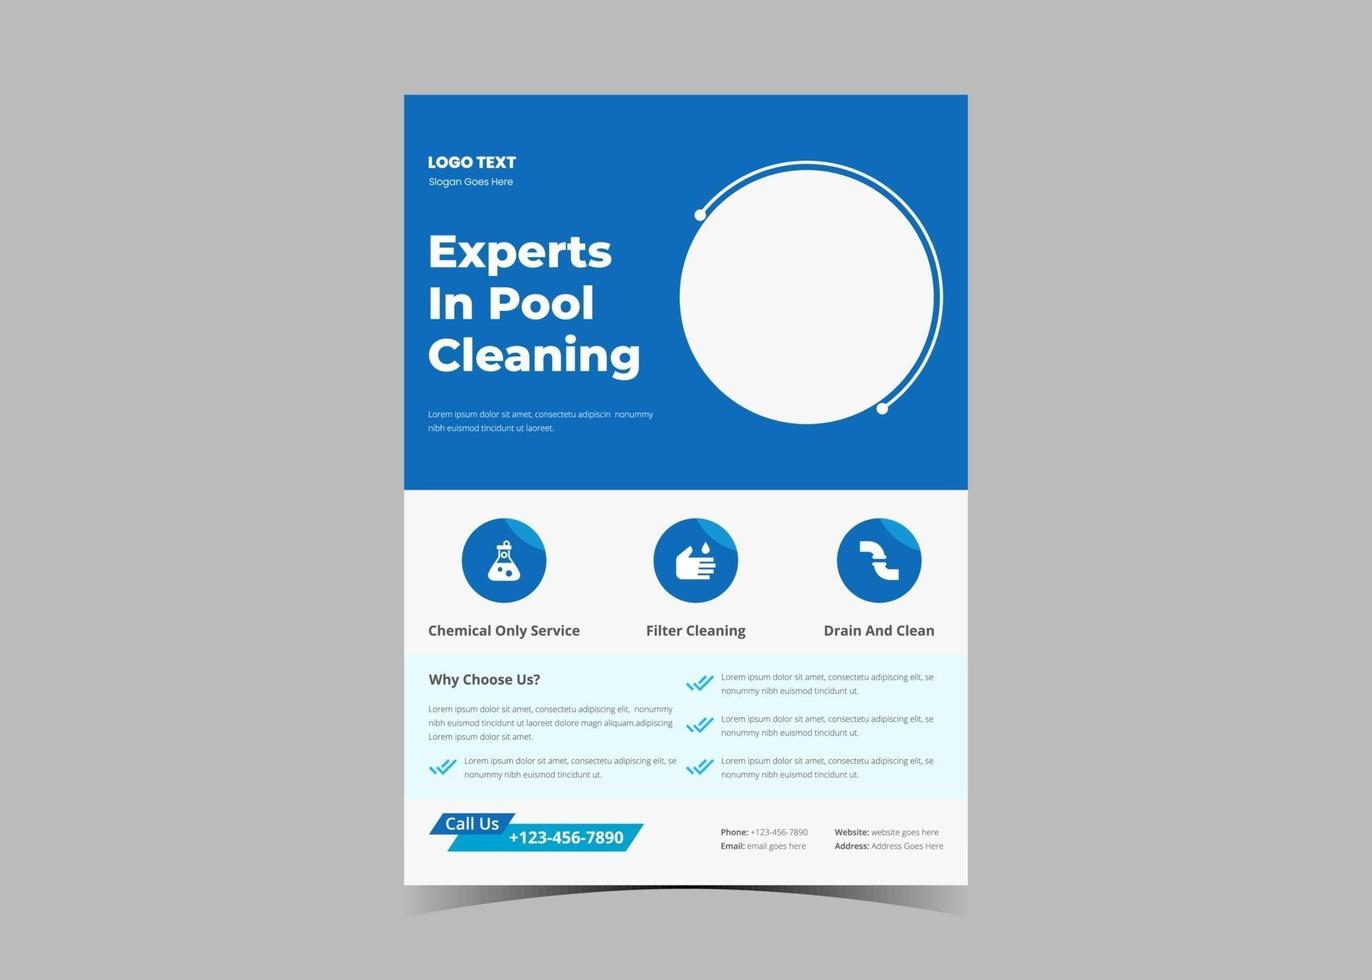 Swimming pool cleaning service flyer template. vector